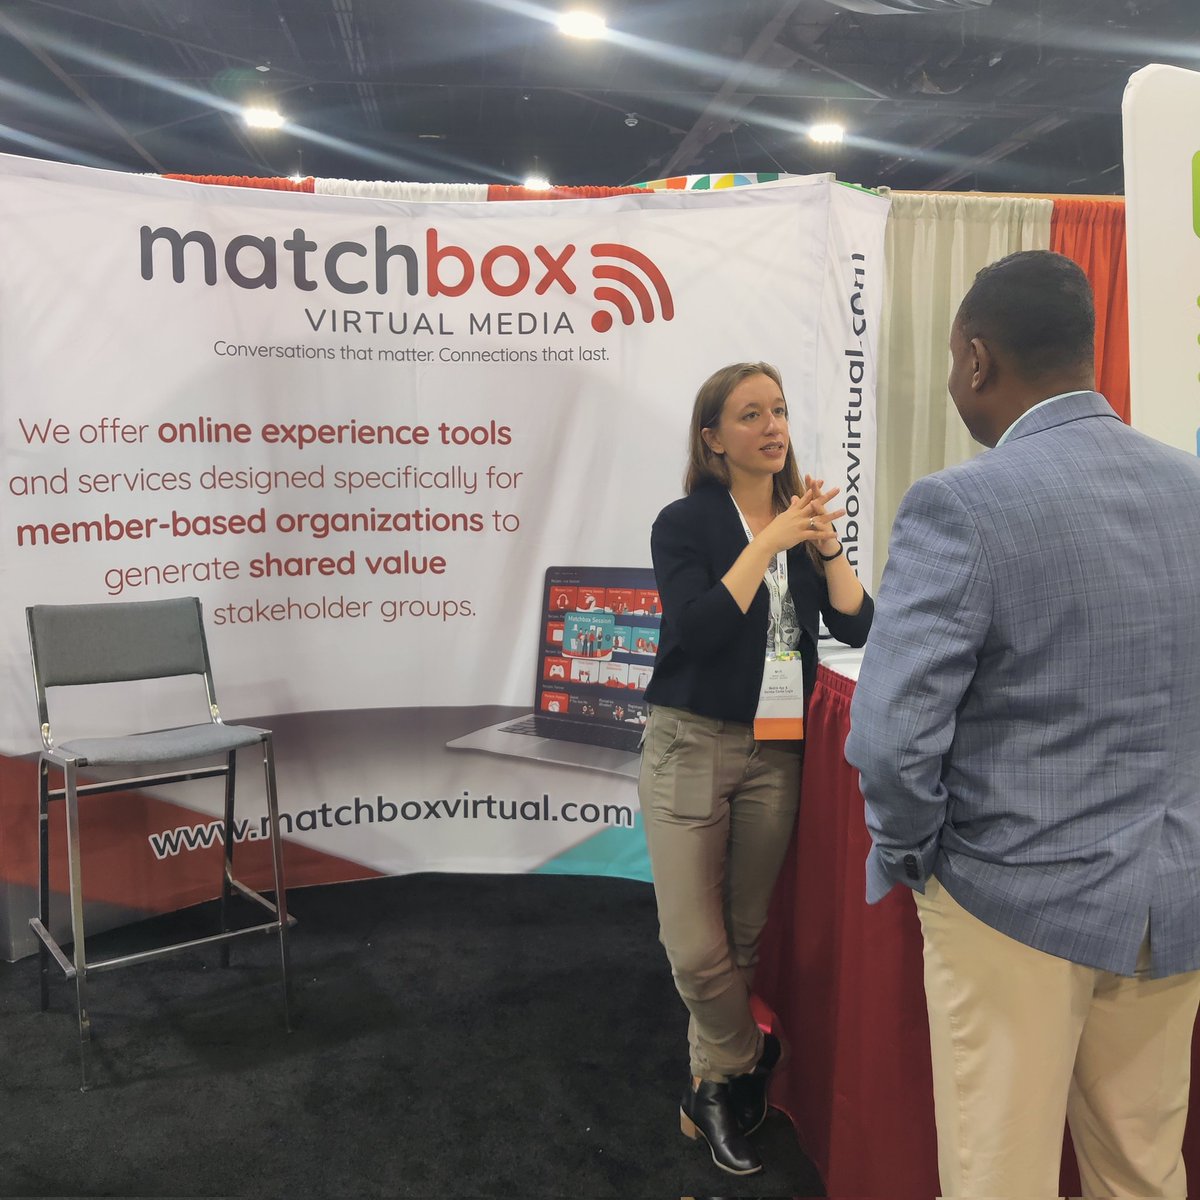 Come see us in booth 551 to talk about #onlineexperience and #virtualevents to drive #engagement and #revenue

#asae #asaeannual